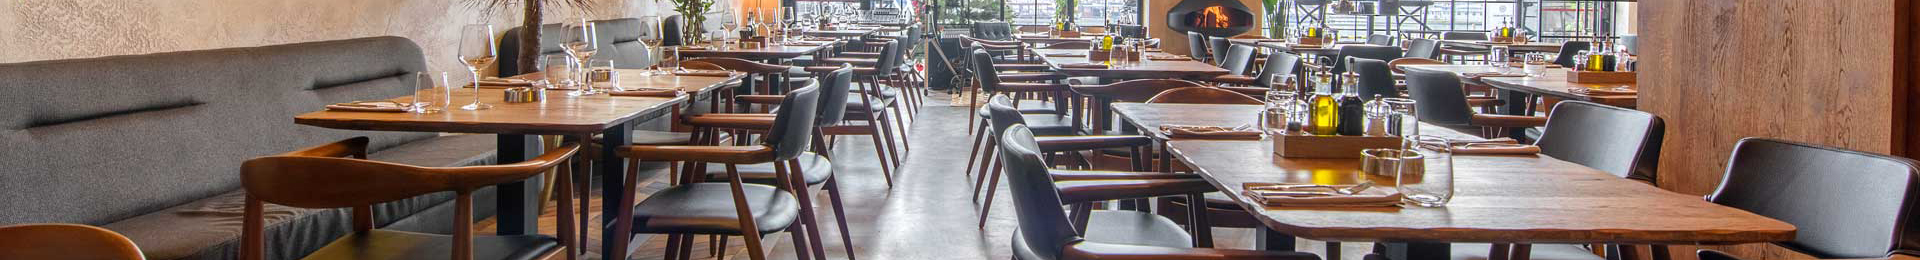 Malaysia Chinese Restaurant Furniture Project